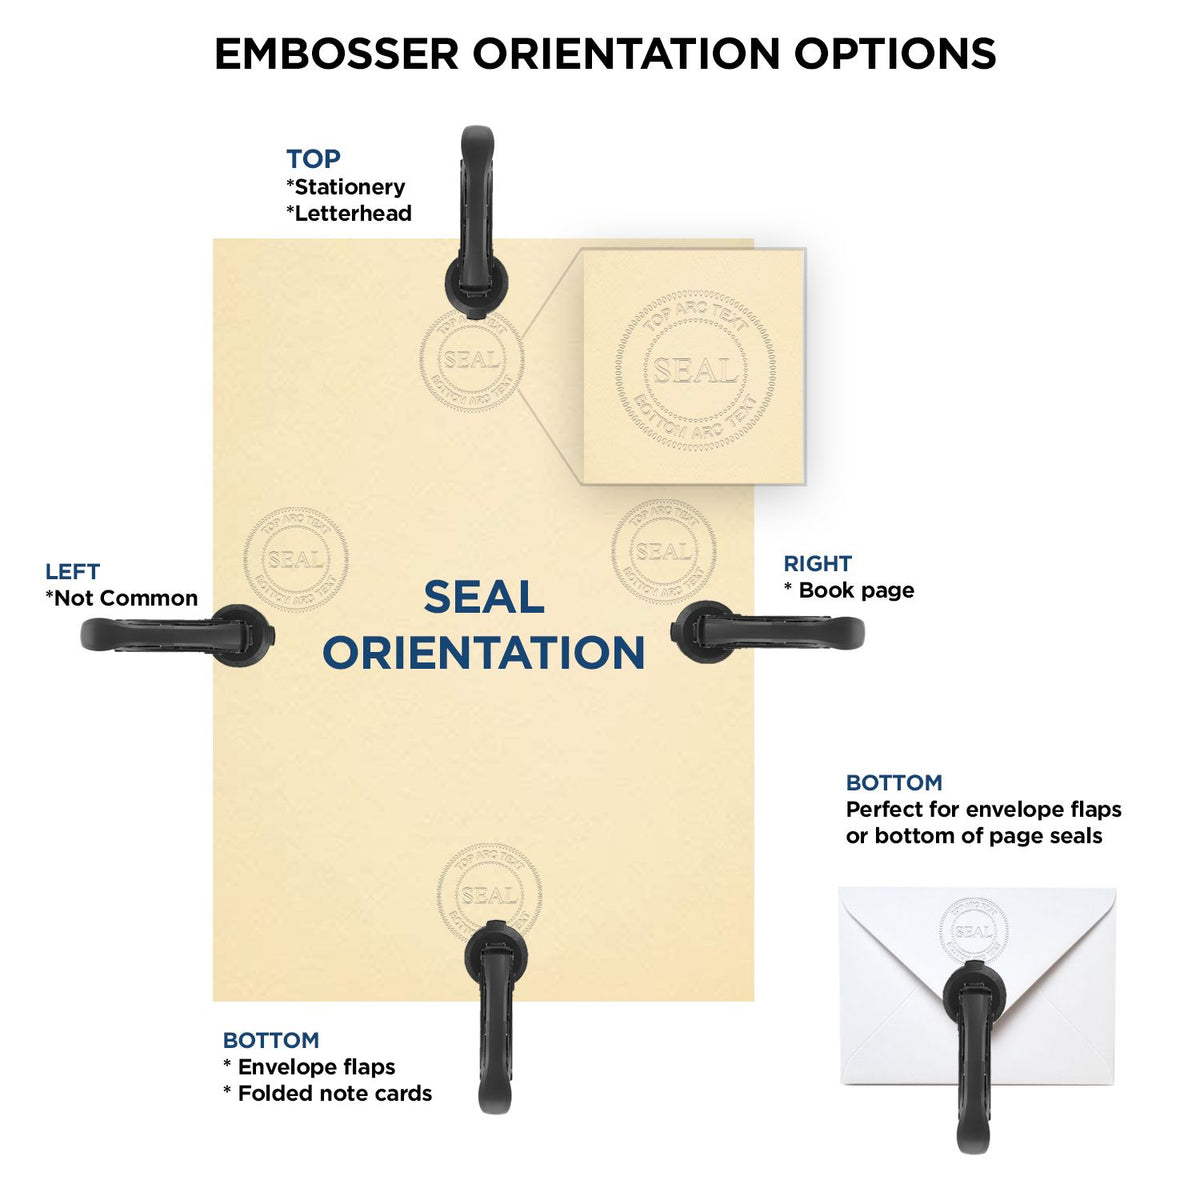 An infographic for the Heavy Duty Cast Iron Tennessee Architect Embosser showing embosser orientation, this is showing examples of a top, bottom, right and left insert.